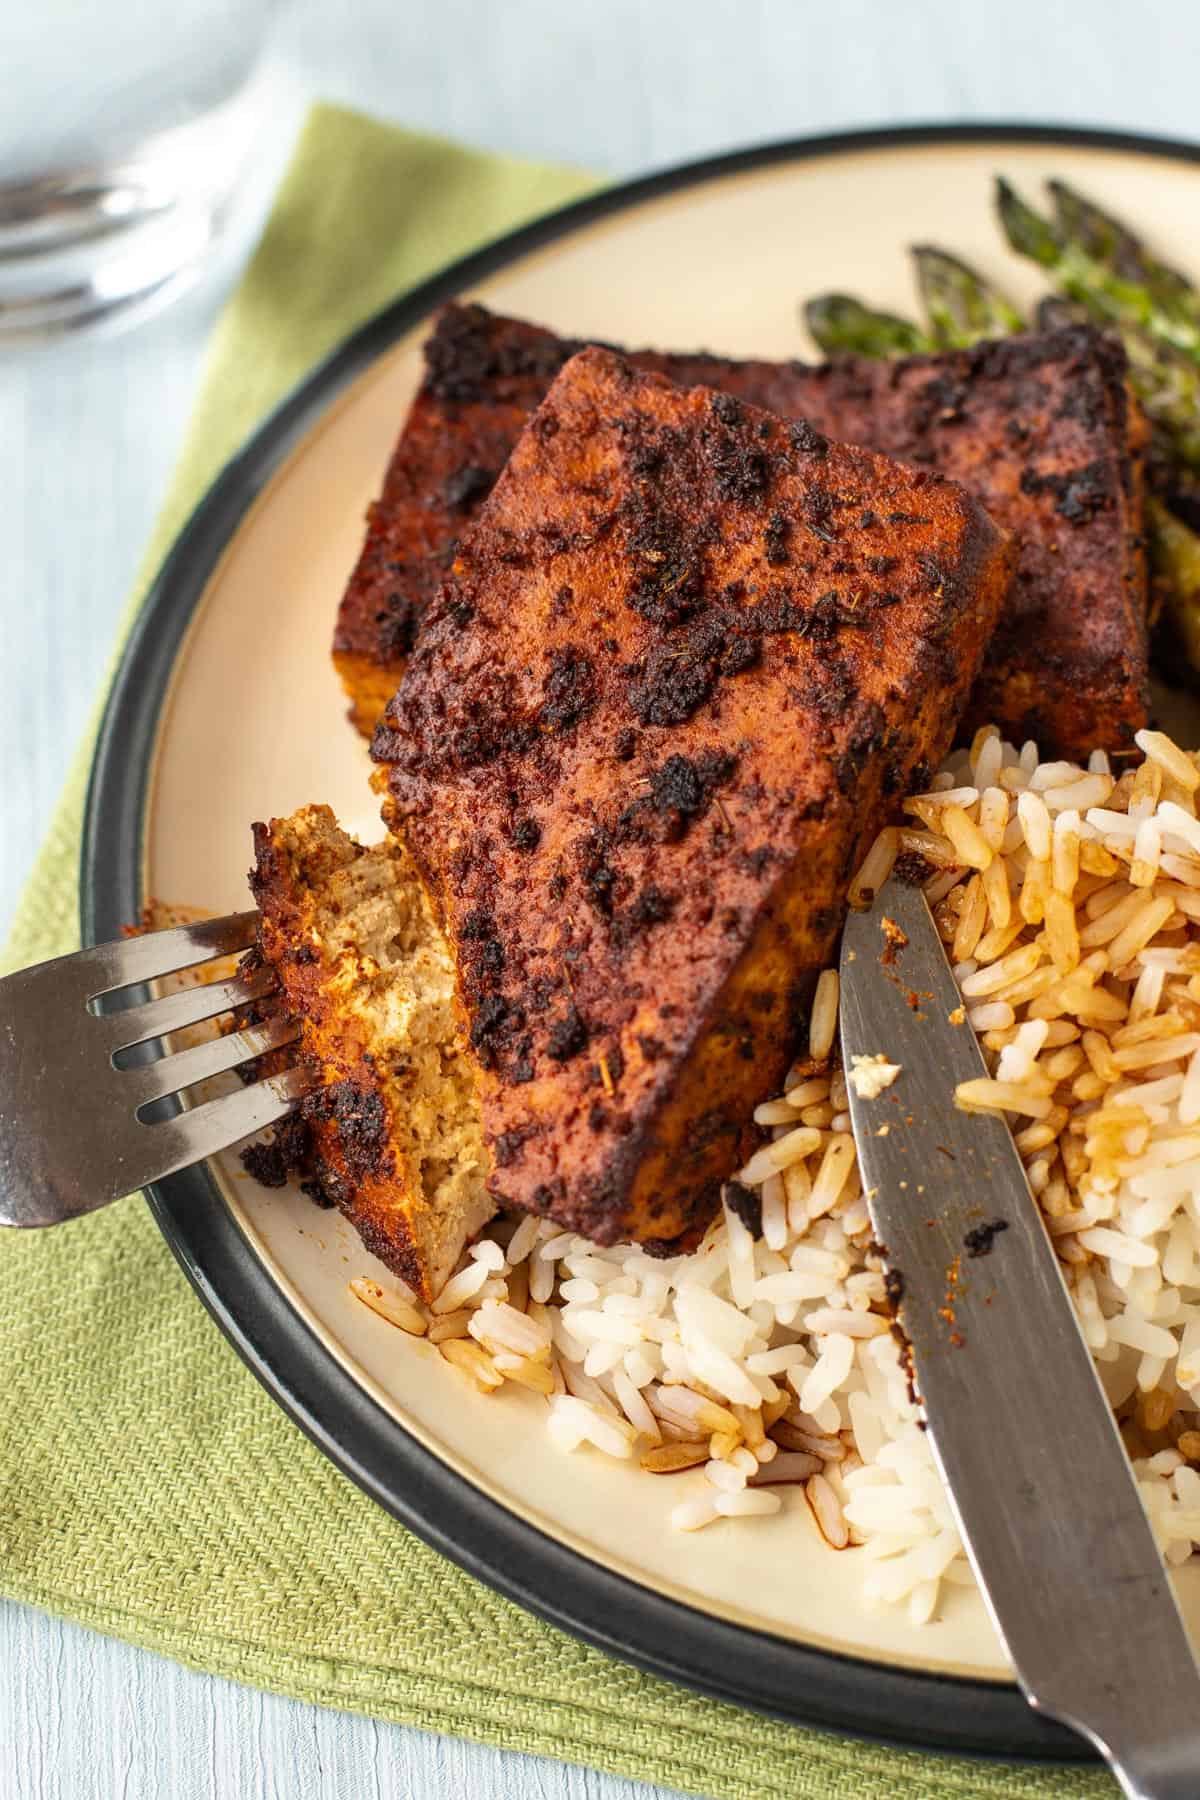 A blackened tofu steak being cut open, served with rice.